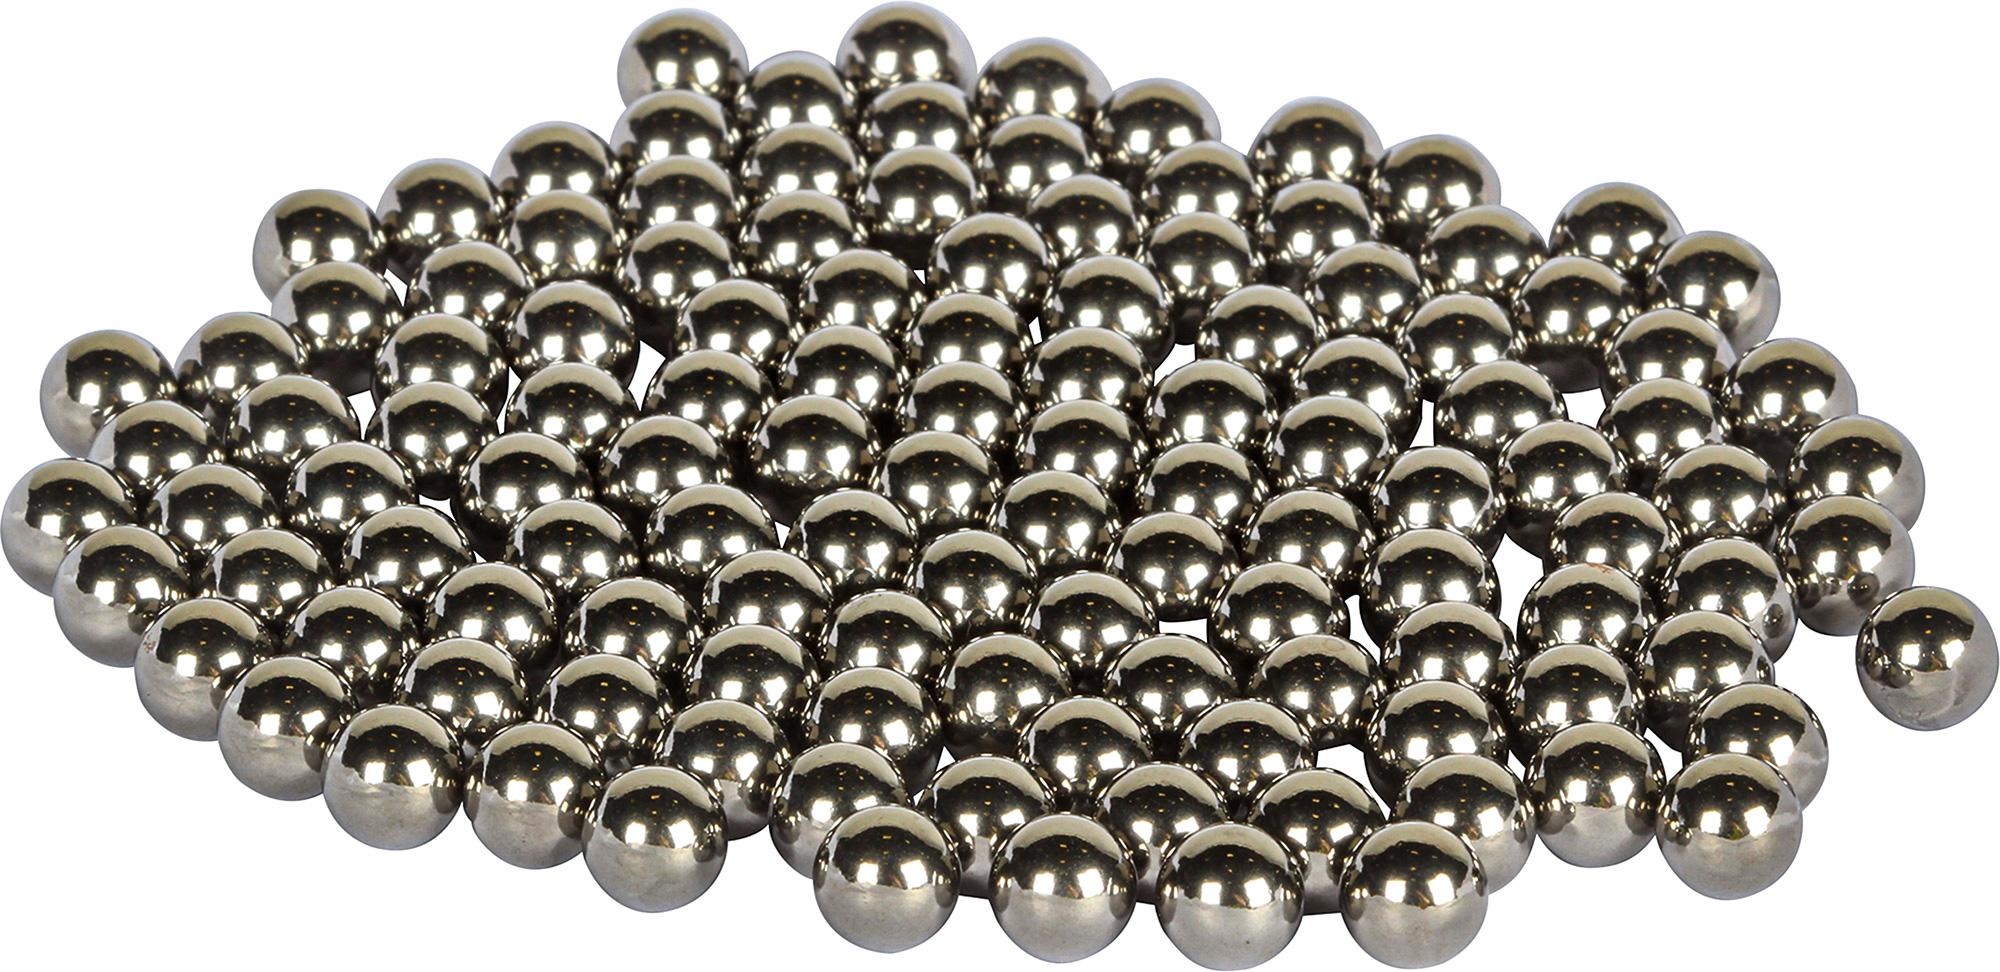 1,250 Count 3/8 Steel Ball Sling Shot Ammo 10 lbs